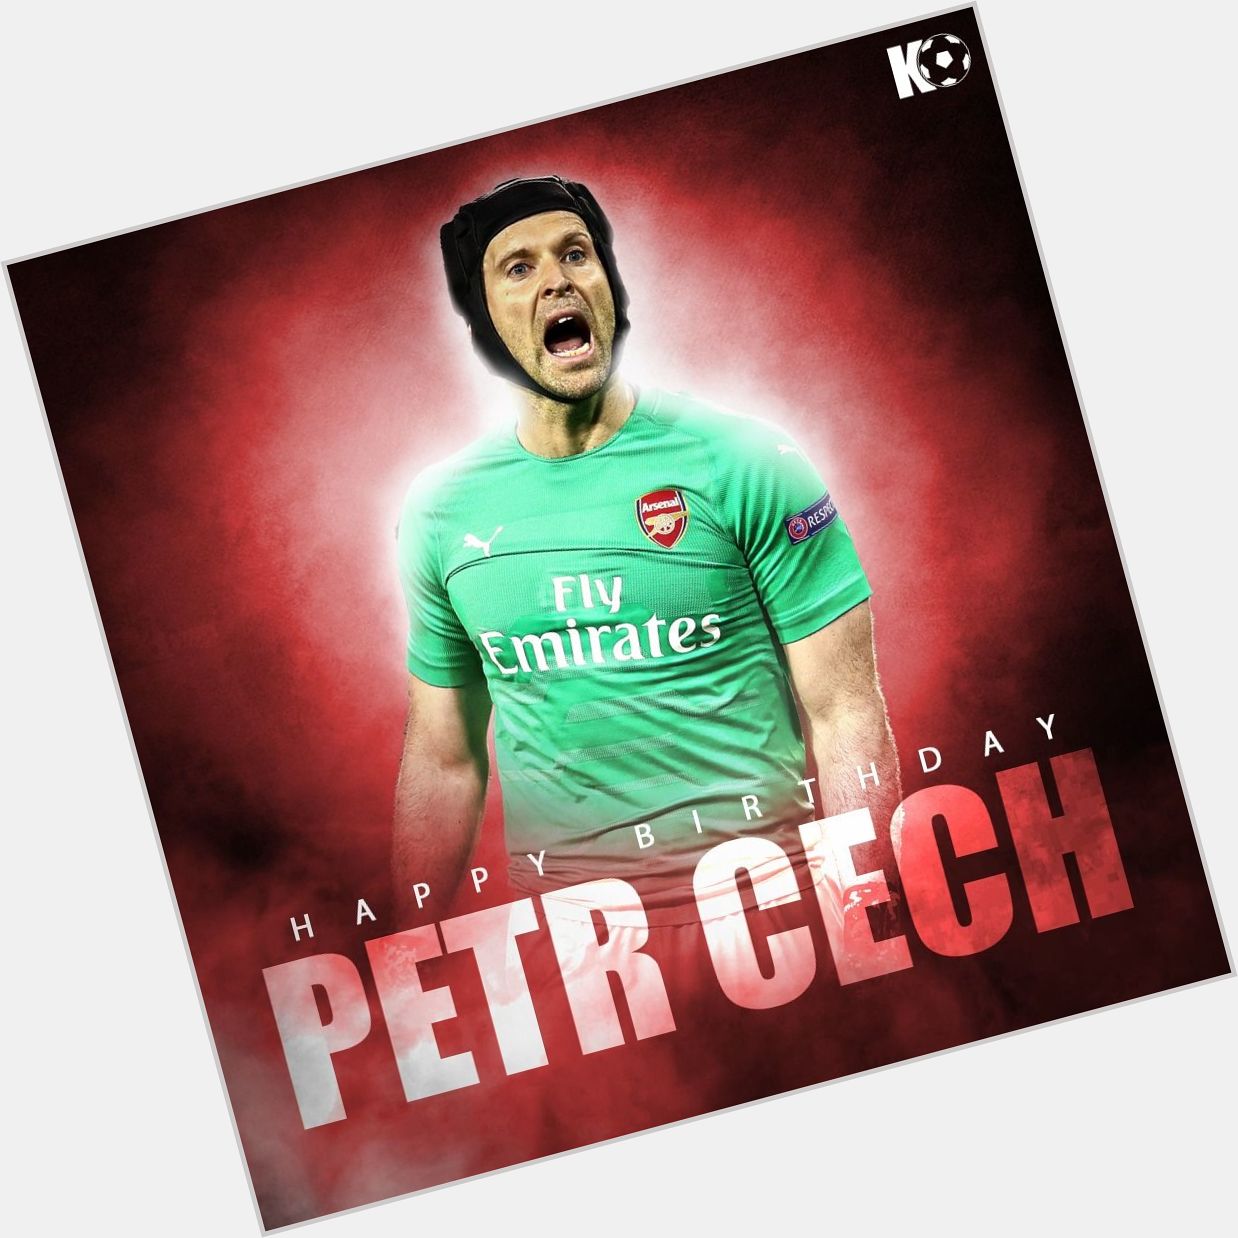 Join in wishing Petr Cech a Happy Birthday! 